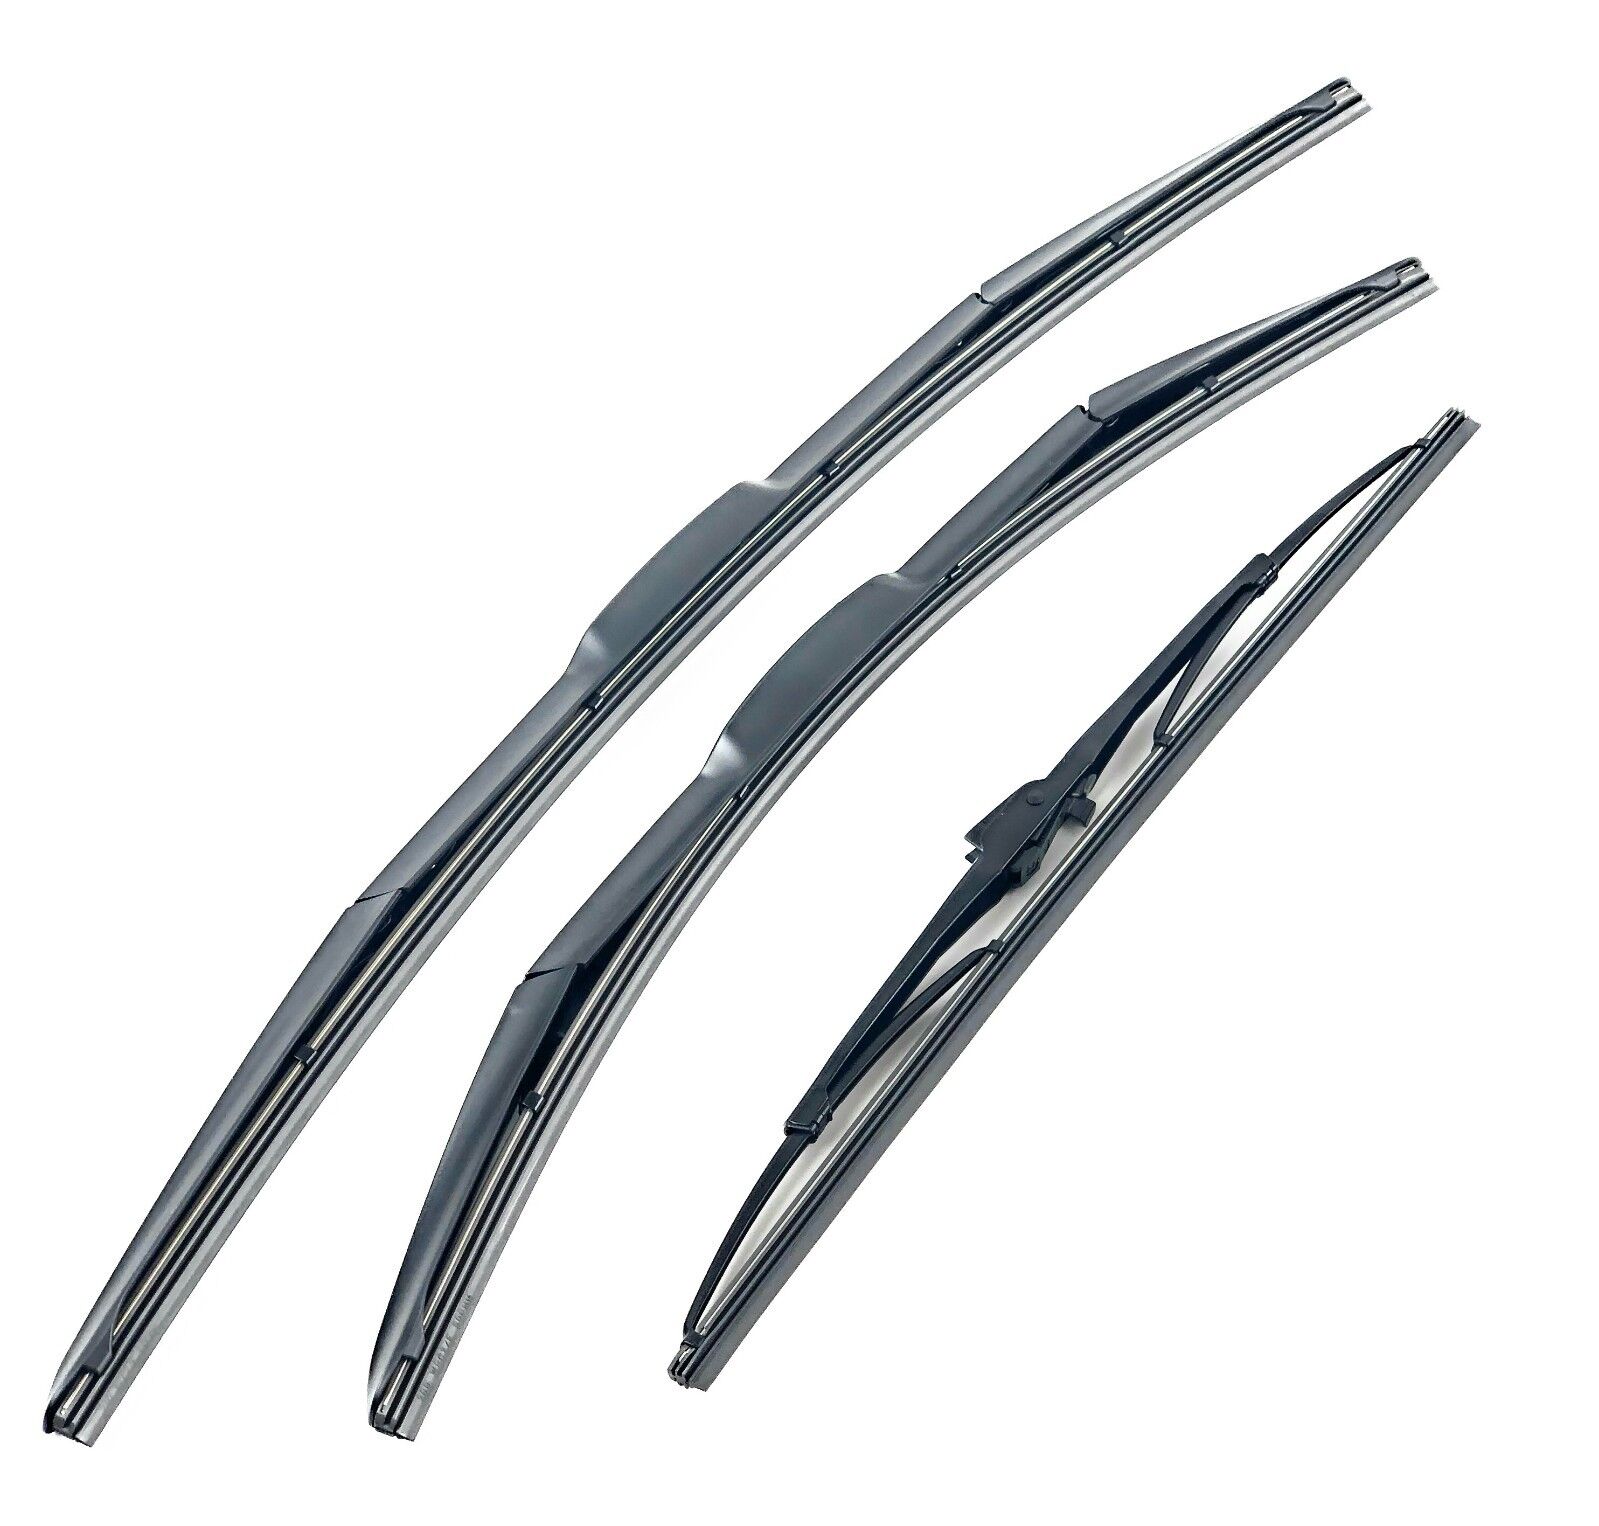 13-15 Range Rover LHD Front Wind Shield and Rear Glass Wiper Blade Set GENUINE